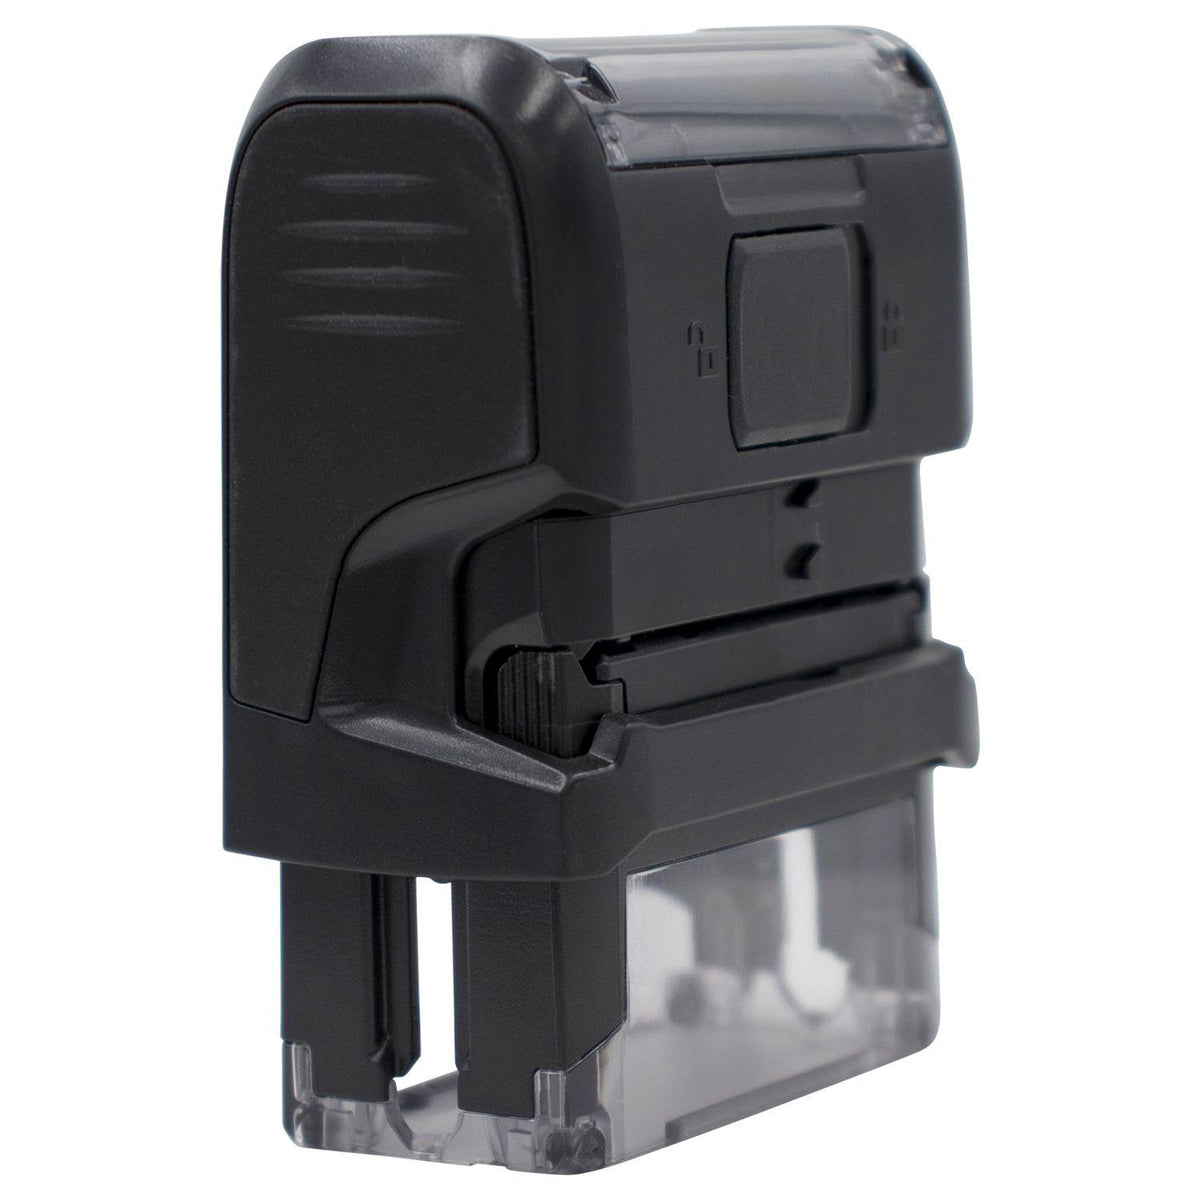 Self Inking Hot Document Stamp - Engineer Seal Stamps - Brand_Trodat, Impression Size_Small, Stamp Type_Self-Inking Stamp, Type of Use_Office, Type of Use_Professional